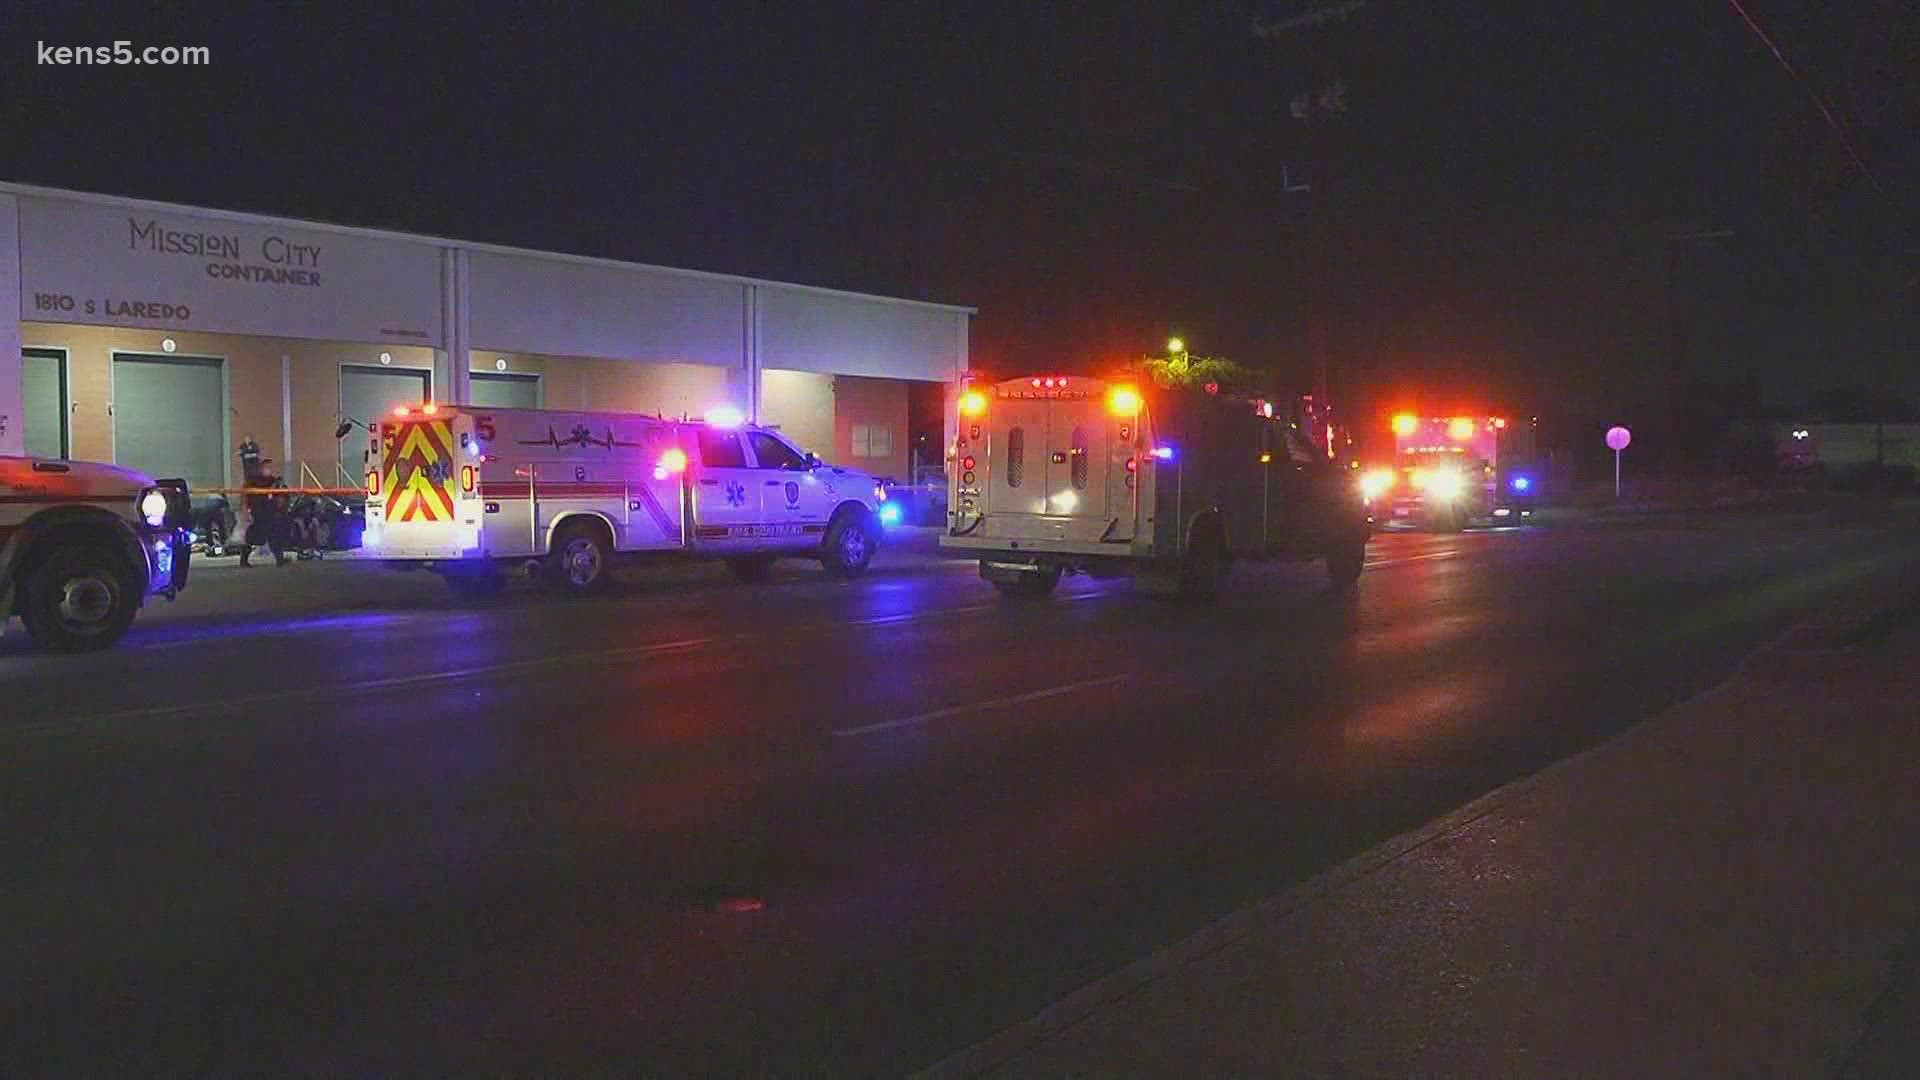 Police said a 27-year-old woman was pronounced dead at the scene after she crashed into loading docks. Police said it is unclear what caused the crash.